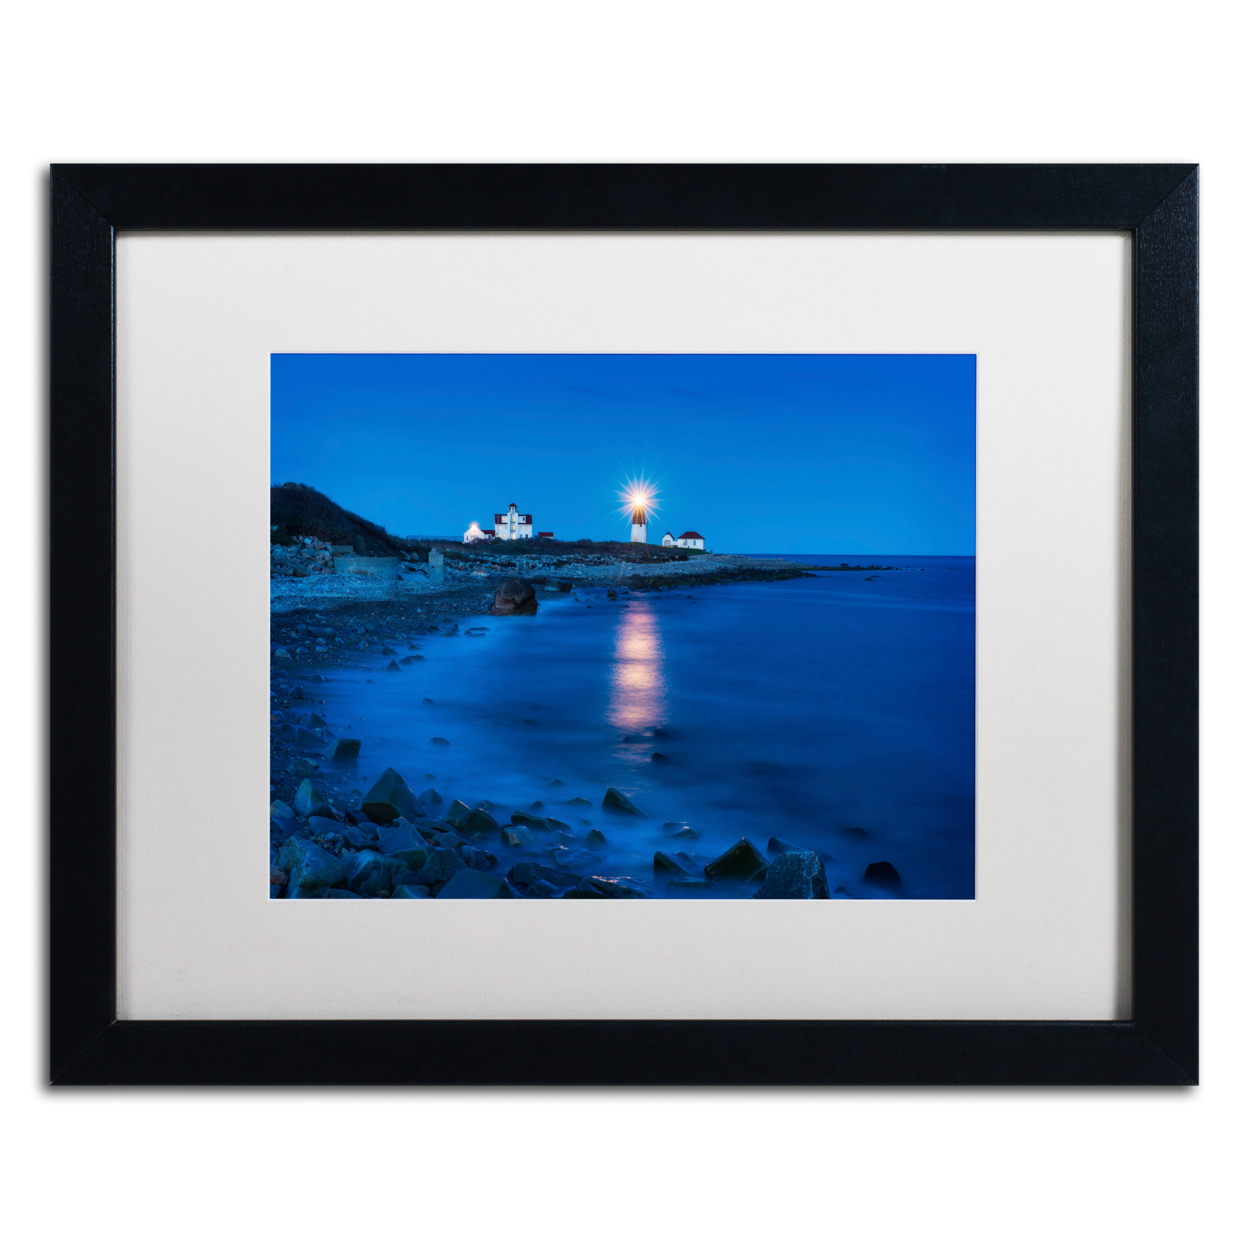 Michael Blanchette Photography 'Star Beacon' Black Wooden Framed Art 18 X 22 Inches